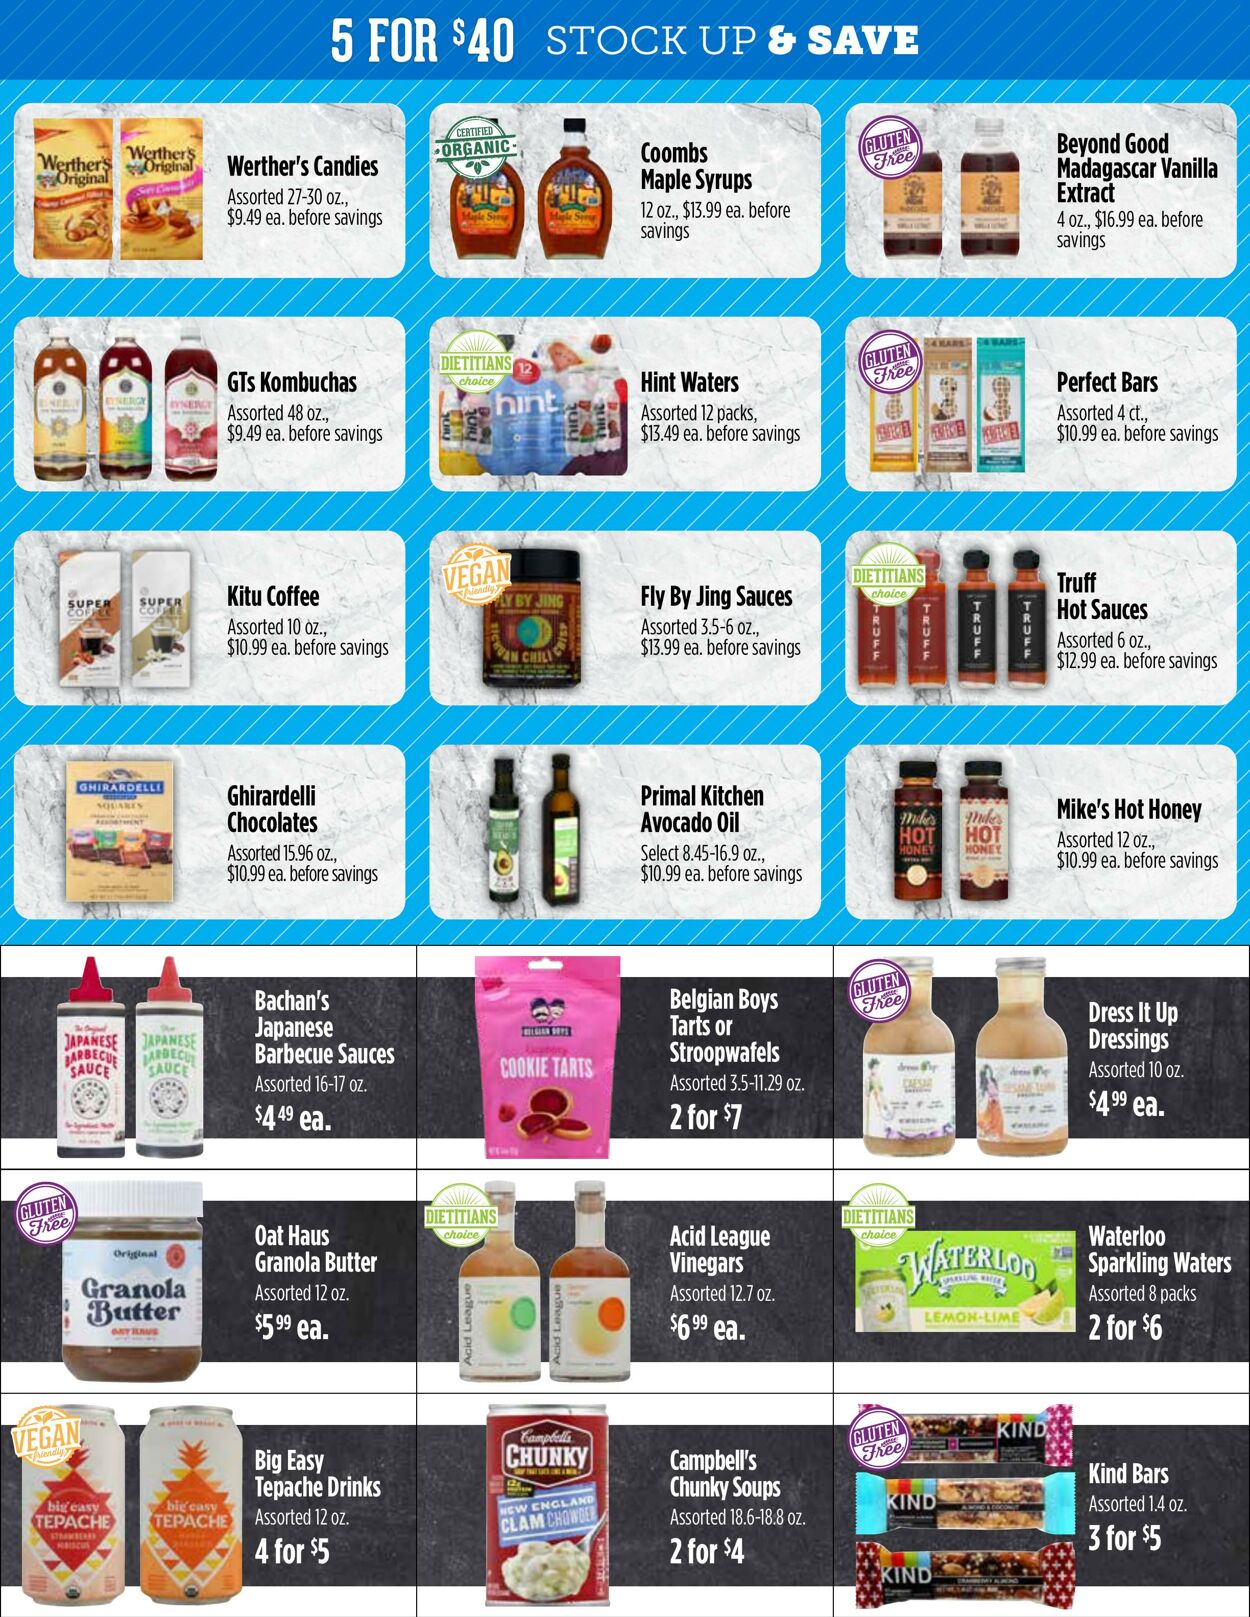 Weekly ad Harmons Grocery 09/06/2022 - 09/12/2022